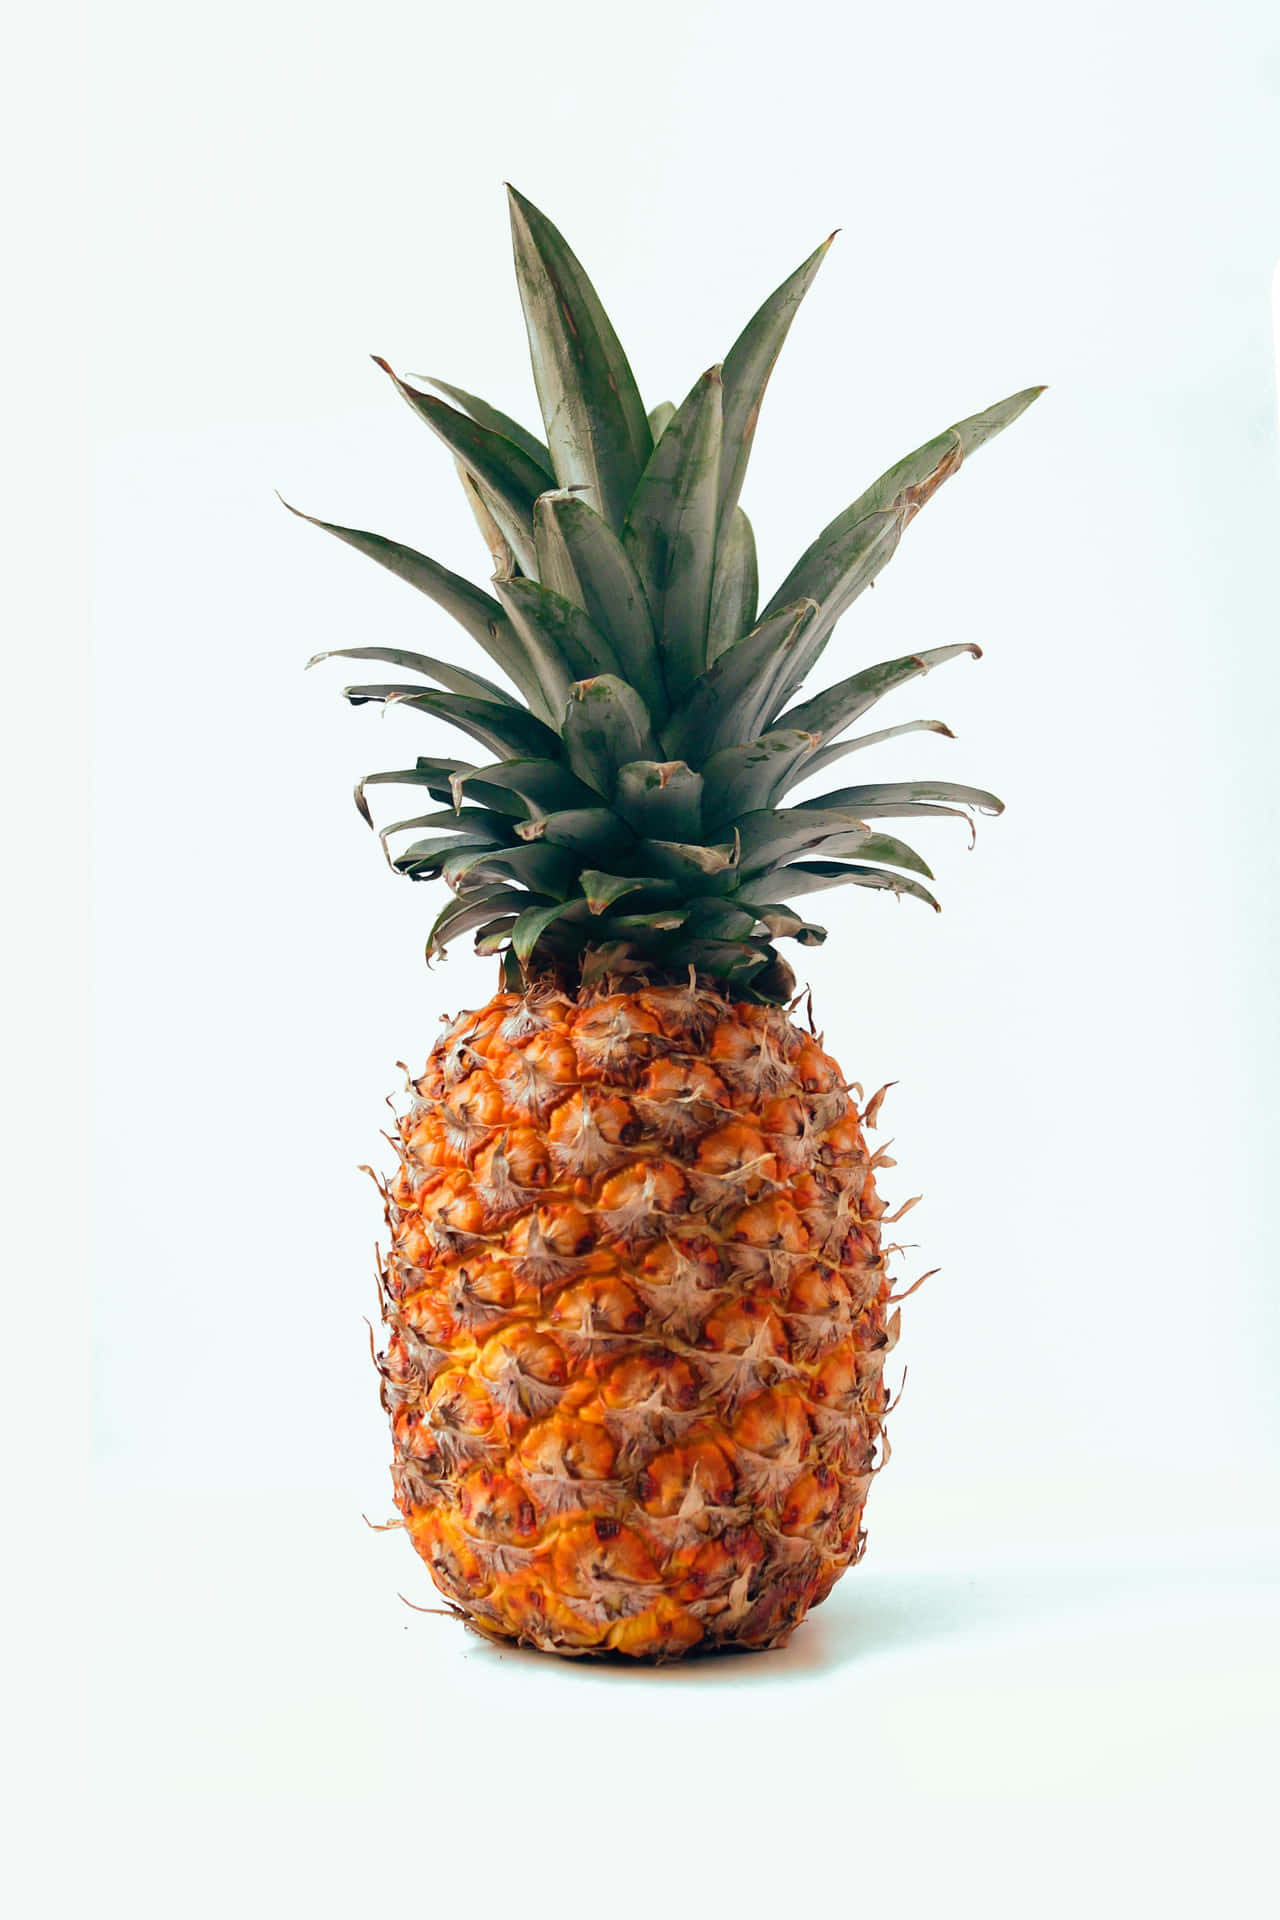 A Fresh and Juicy Pineapple